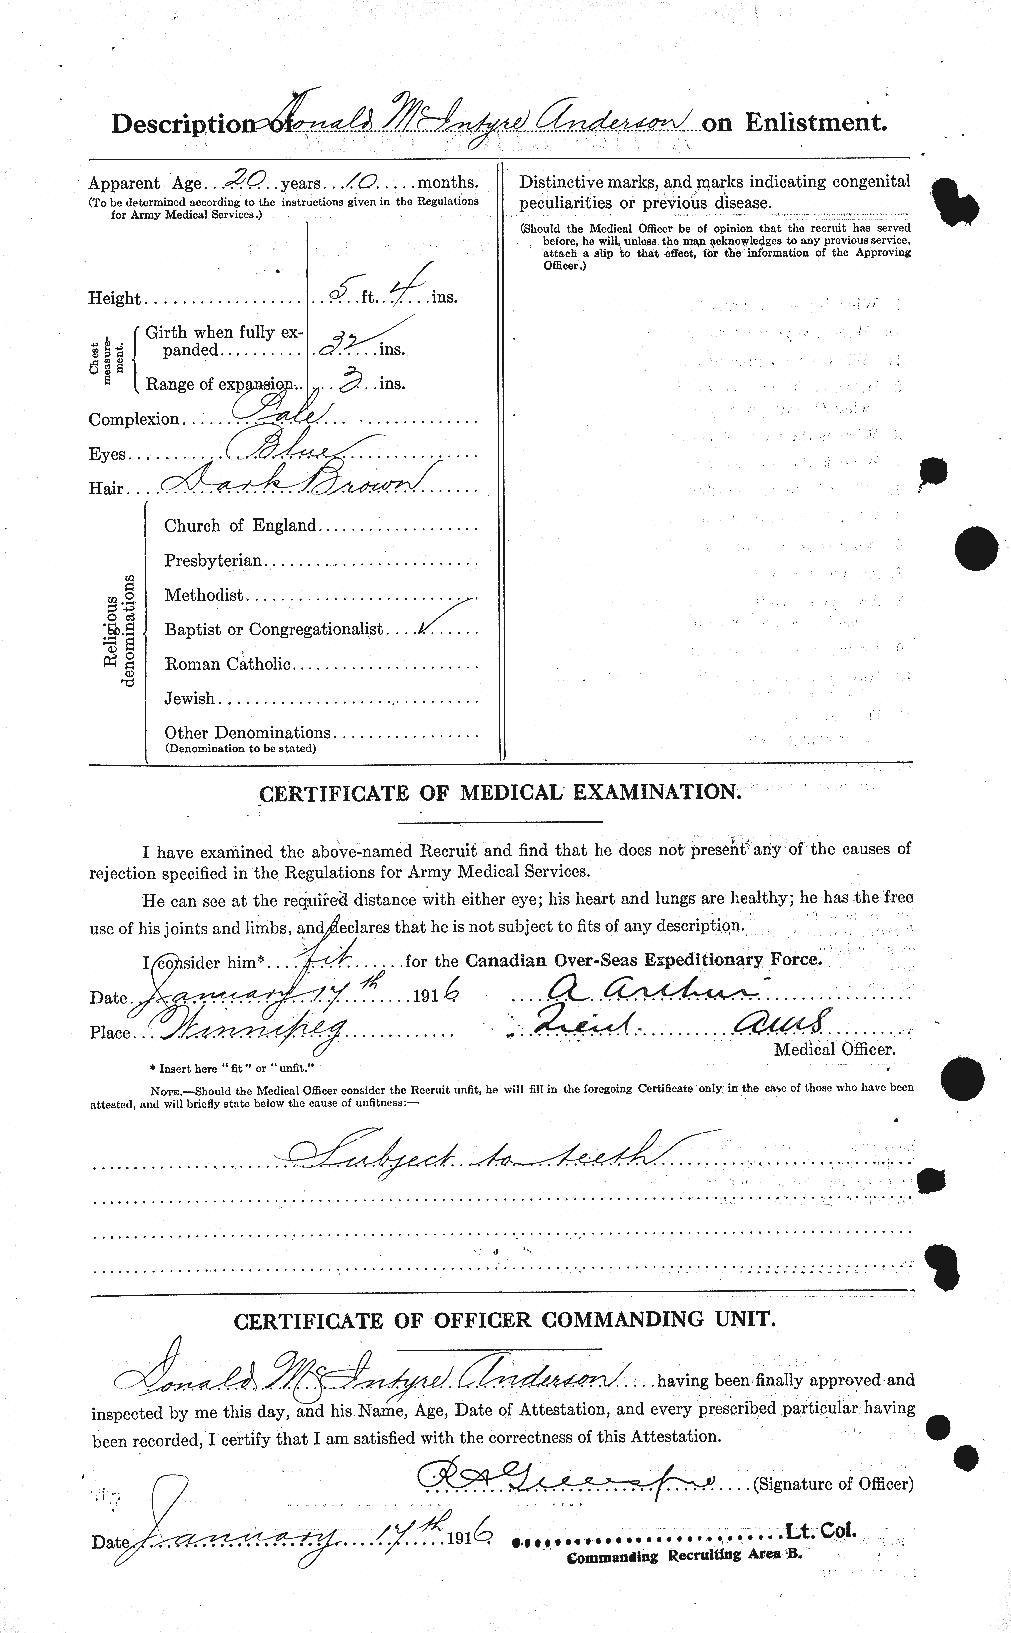 Personnel Records of the First World War - CEF 209982b